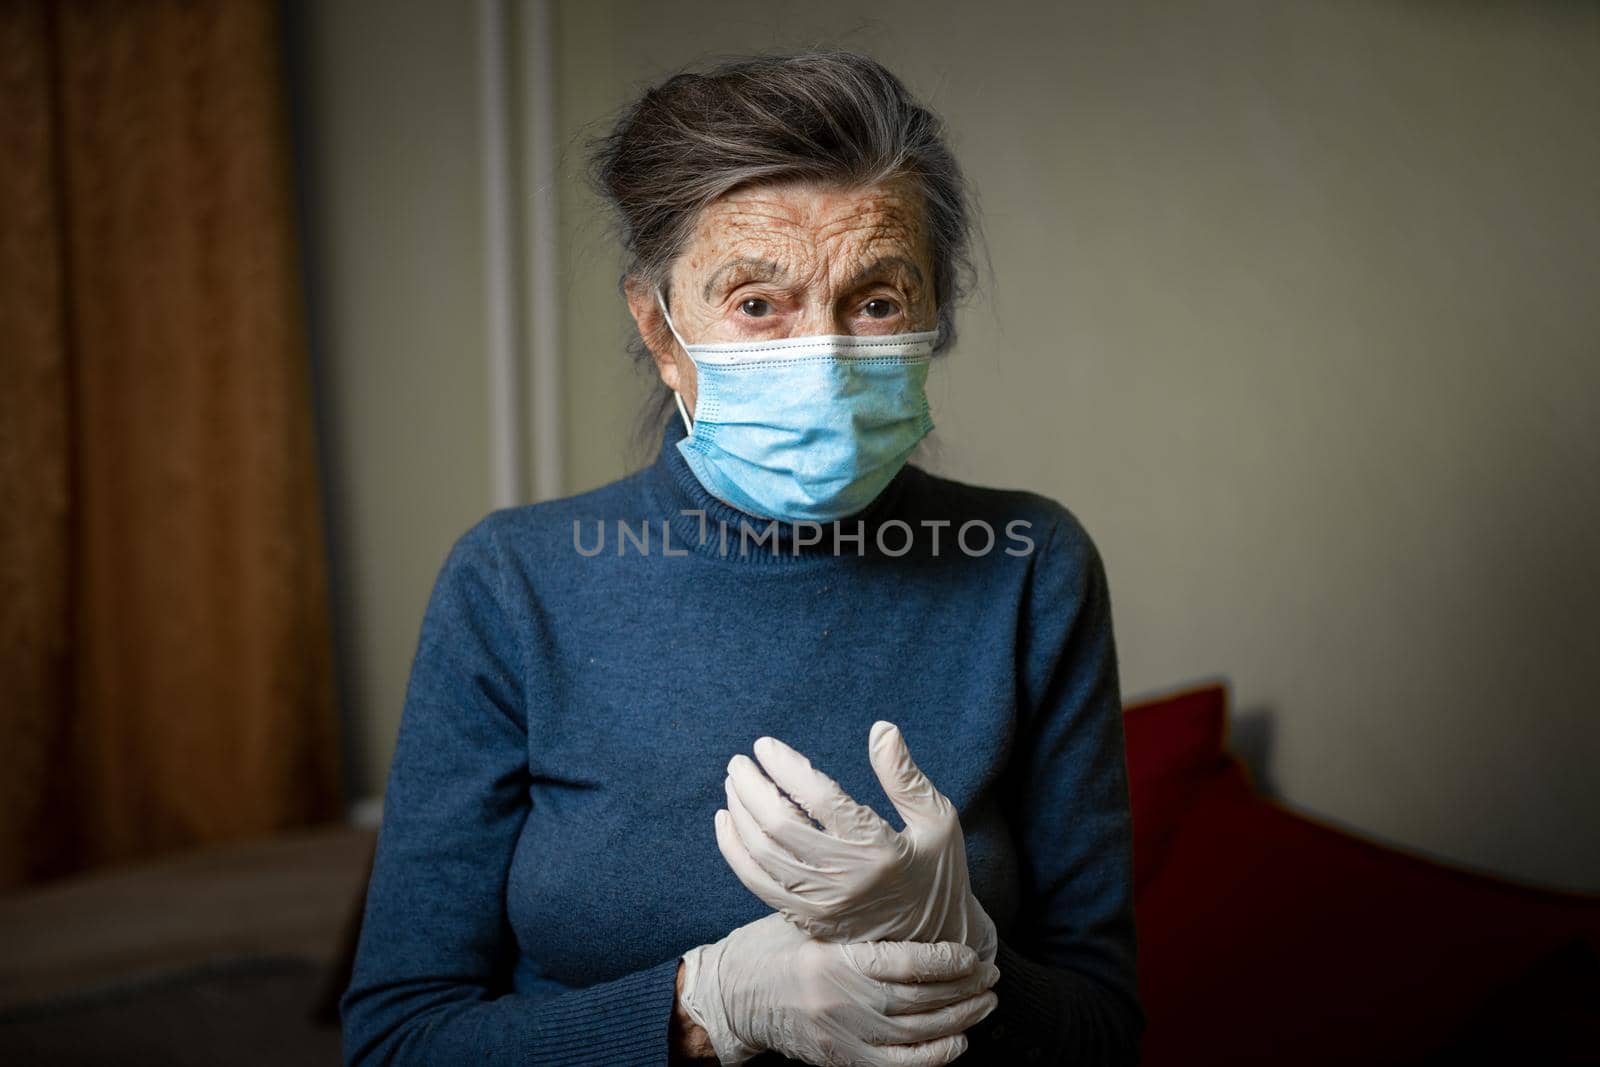 Portrait elderly woman took security measures, wearing gloves and medical mask, ahead of visit by social welfare workers during coronavirus quarantine. Lockdown and loneliness, need for care.